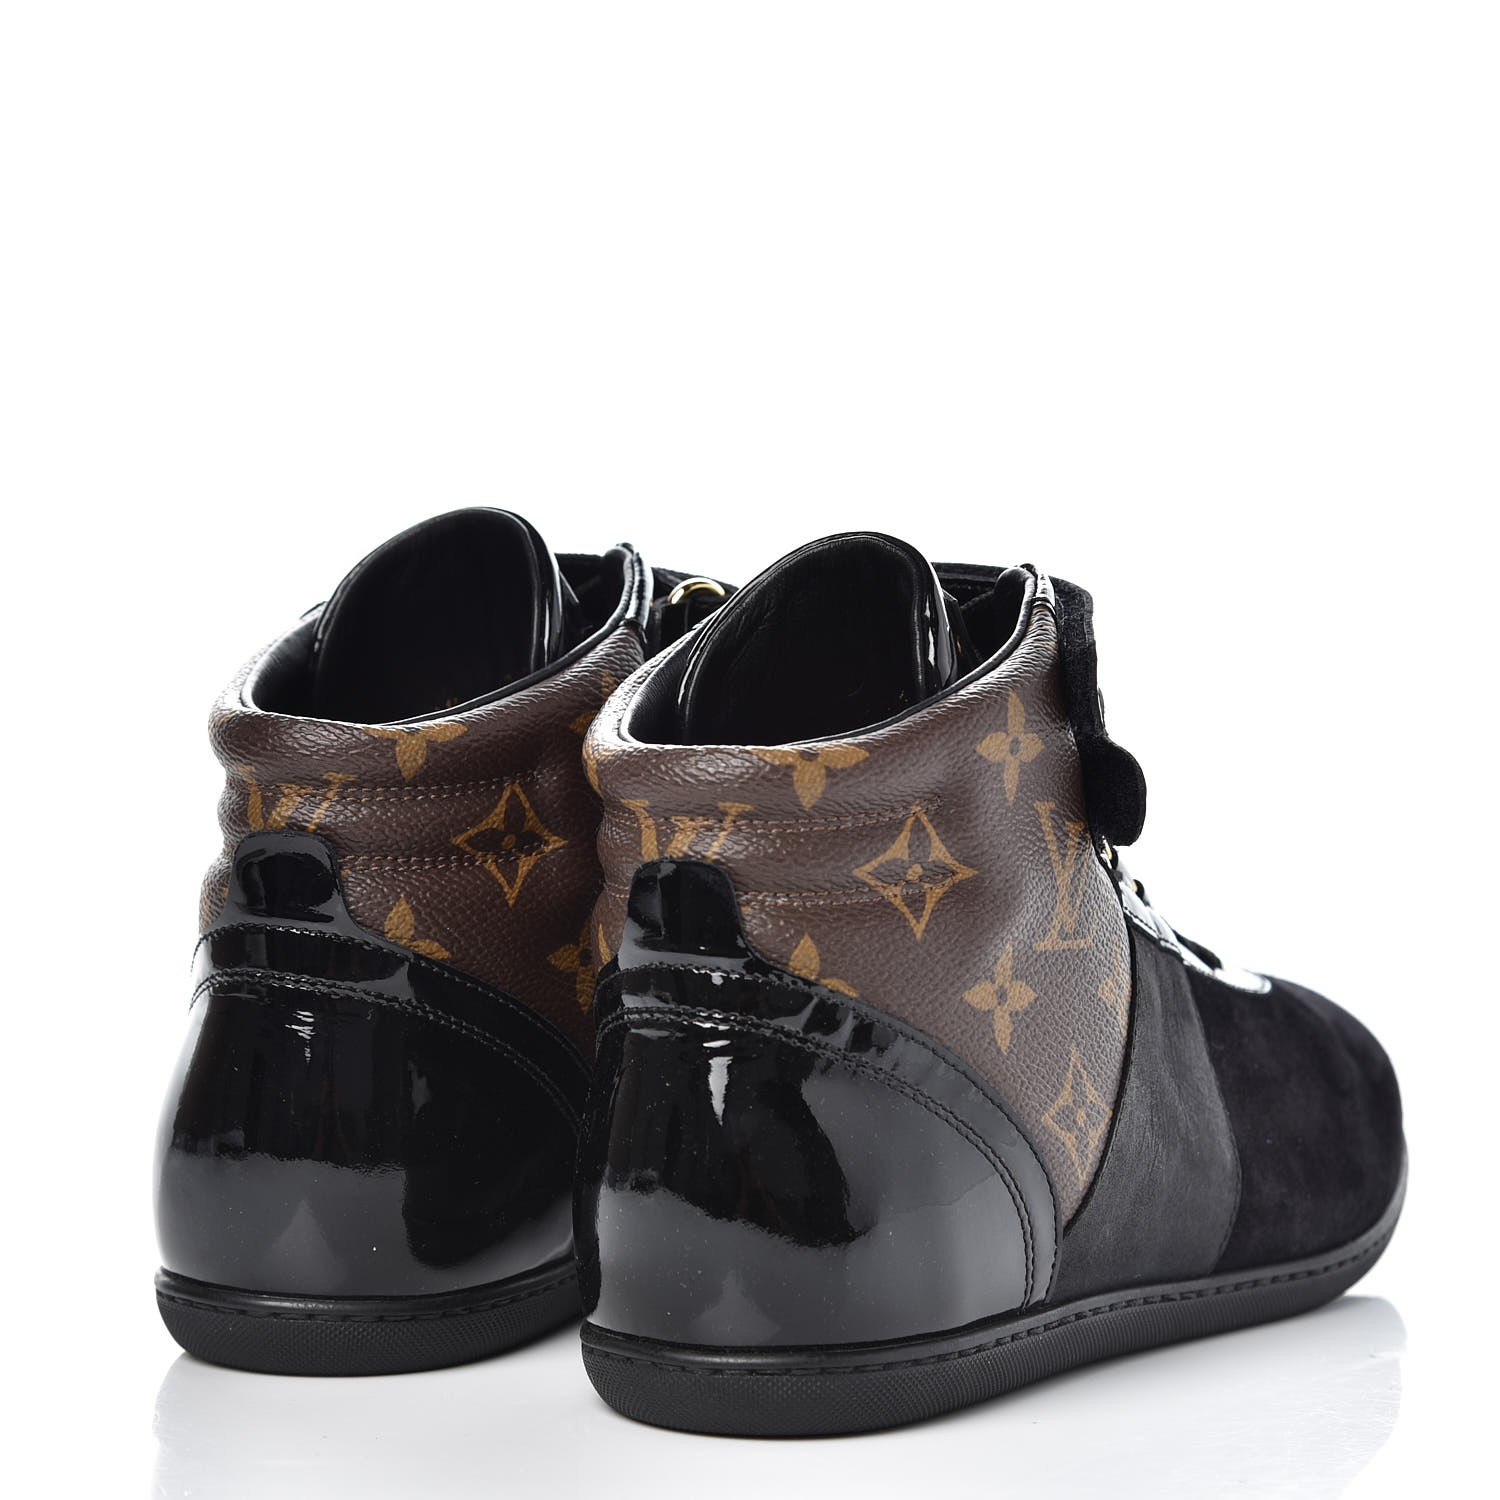 LOUIS VUITTON Monogram Suede Patent Womens Move Up Sneakers 36.5 Black 337009